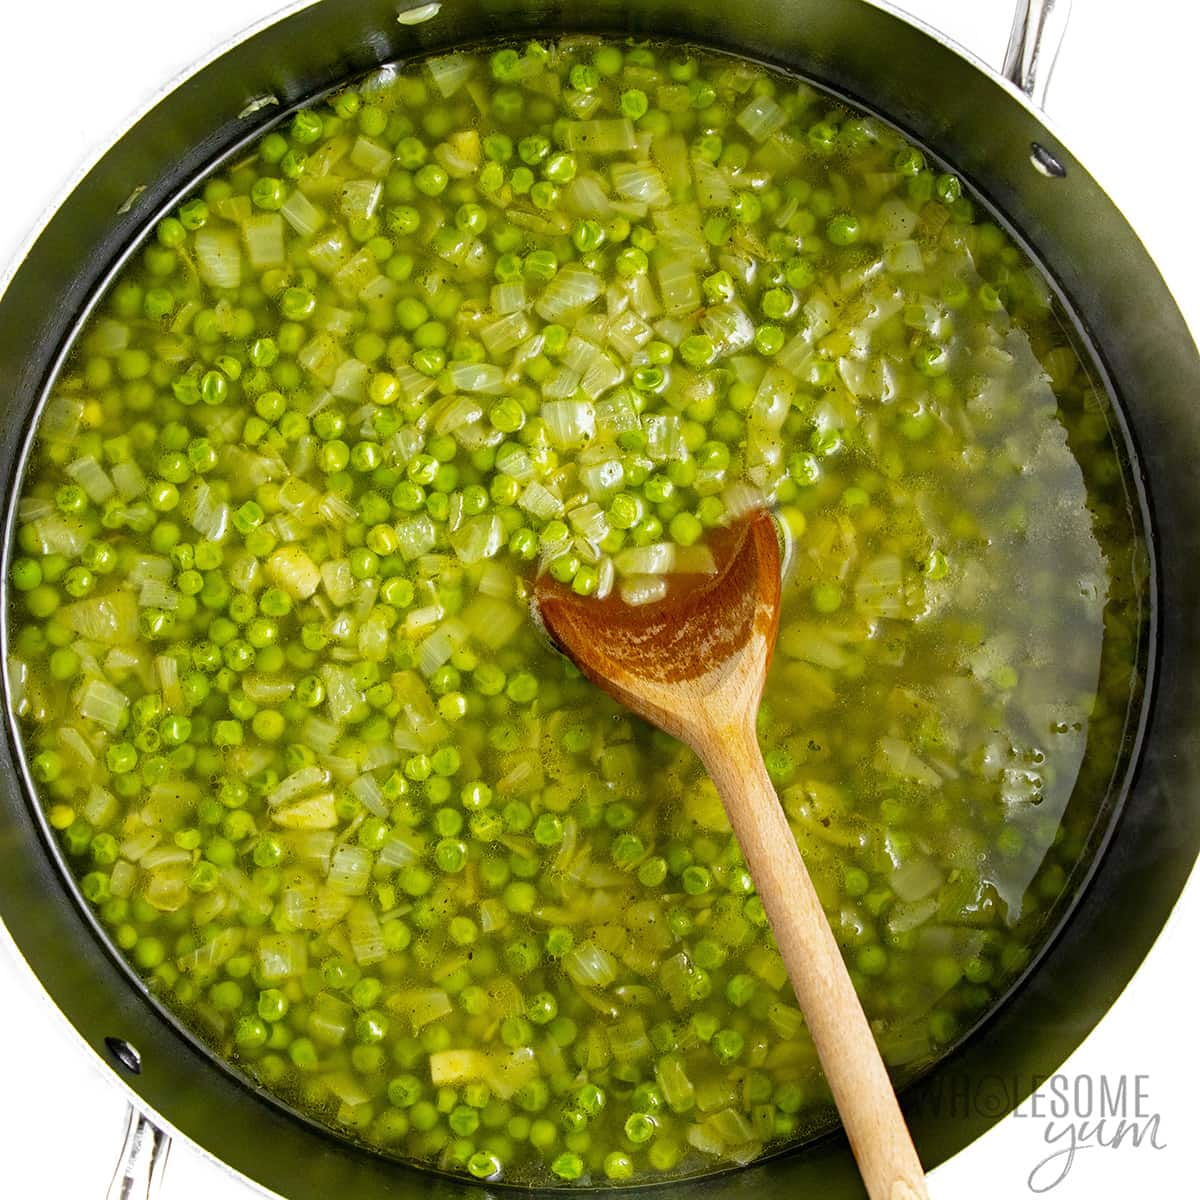 Peas and stock added to the skillet.